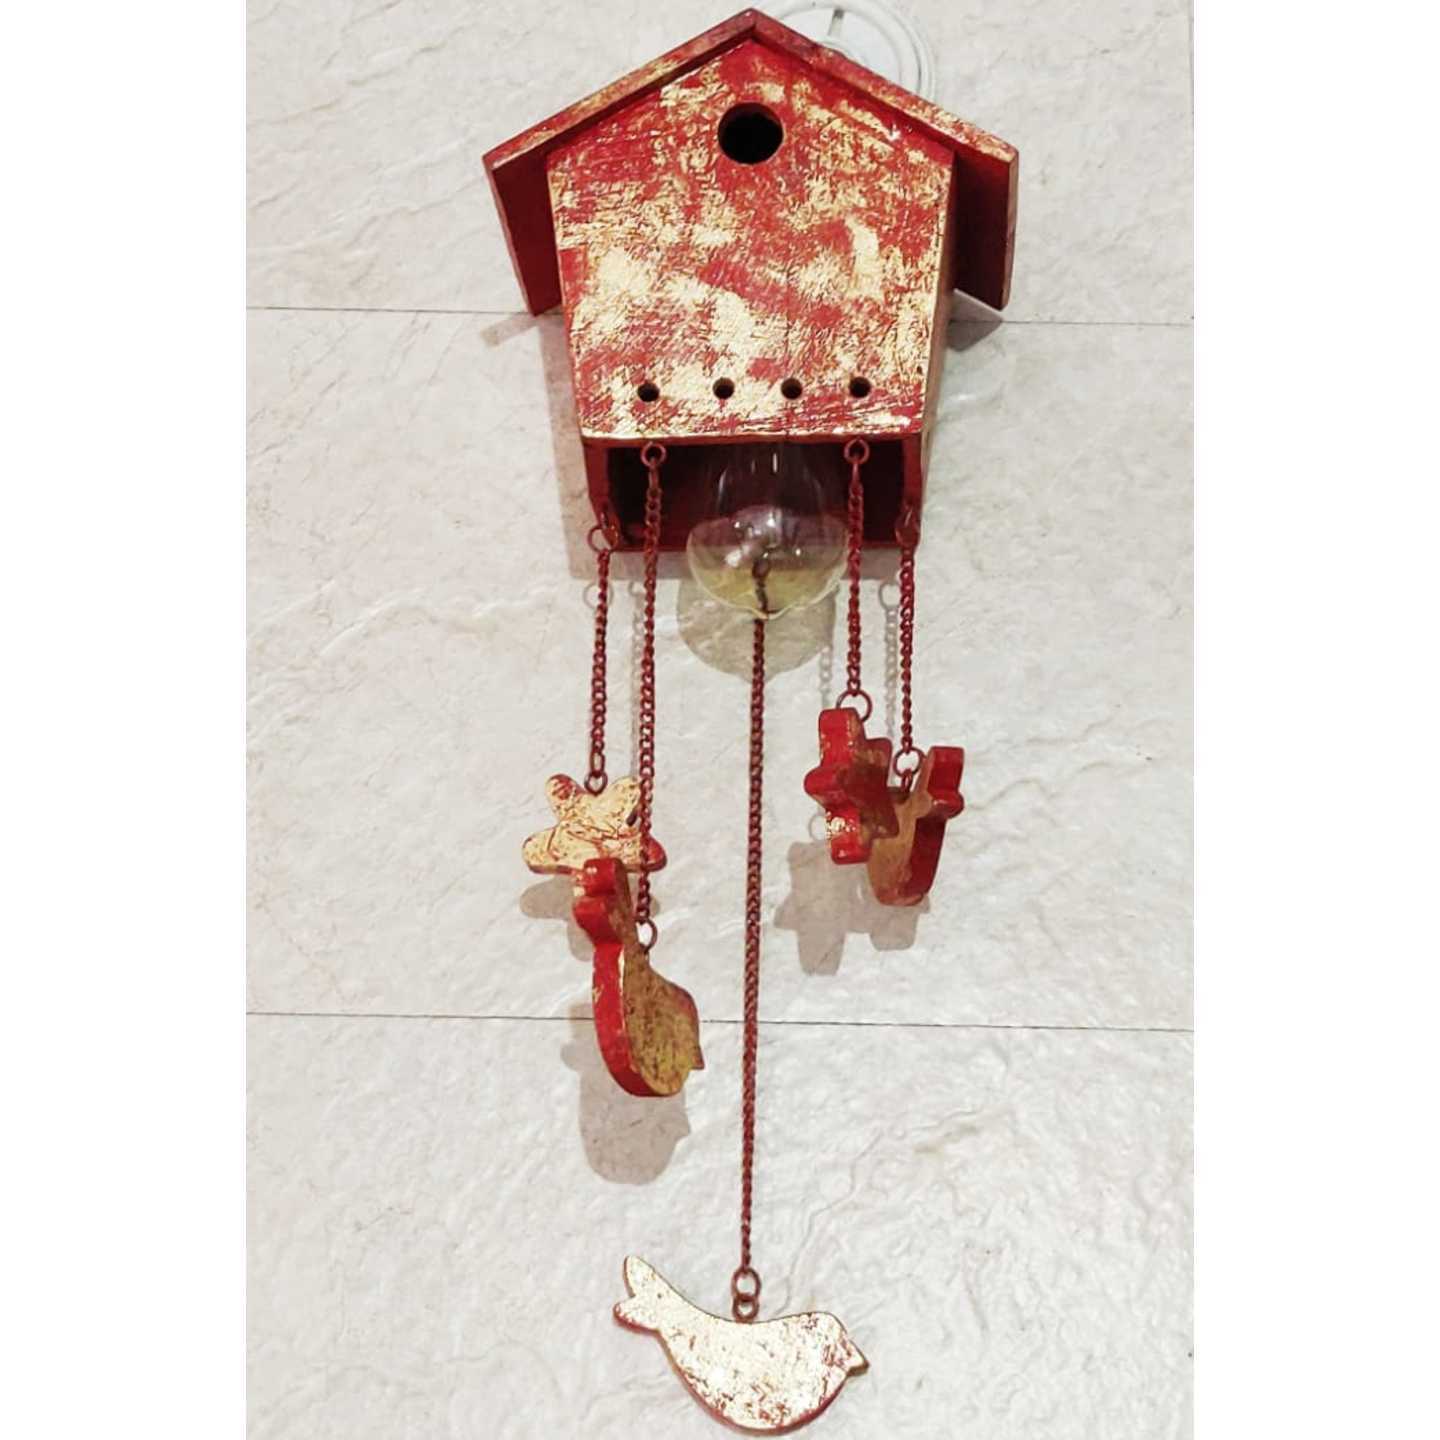 Antique Wooden Hut Wall Lamp With Ornaments Hanging From it   